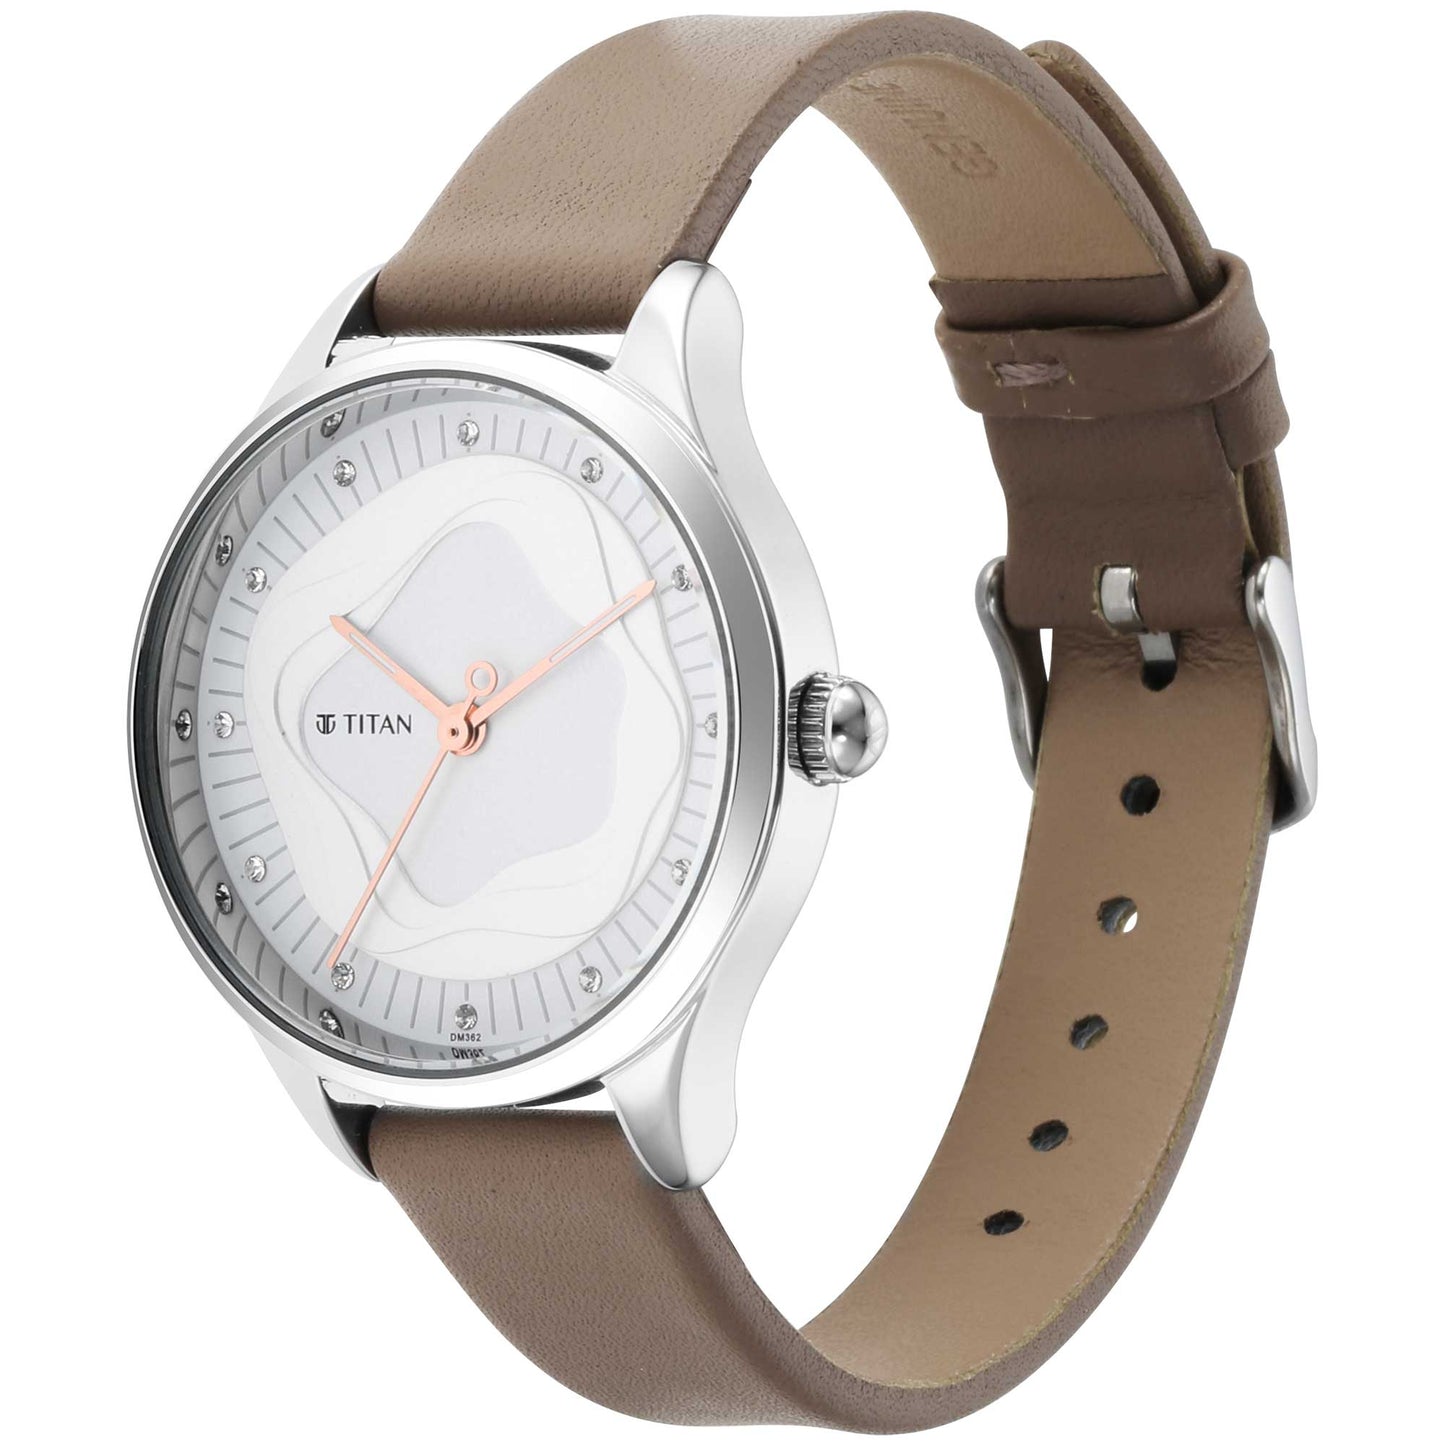 Titan Wander White Dial Analog Leather Strap watch for Women